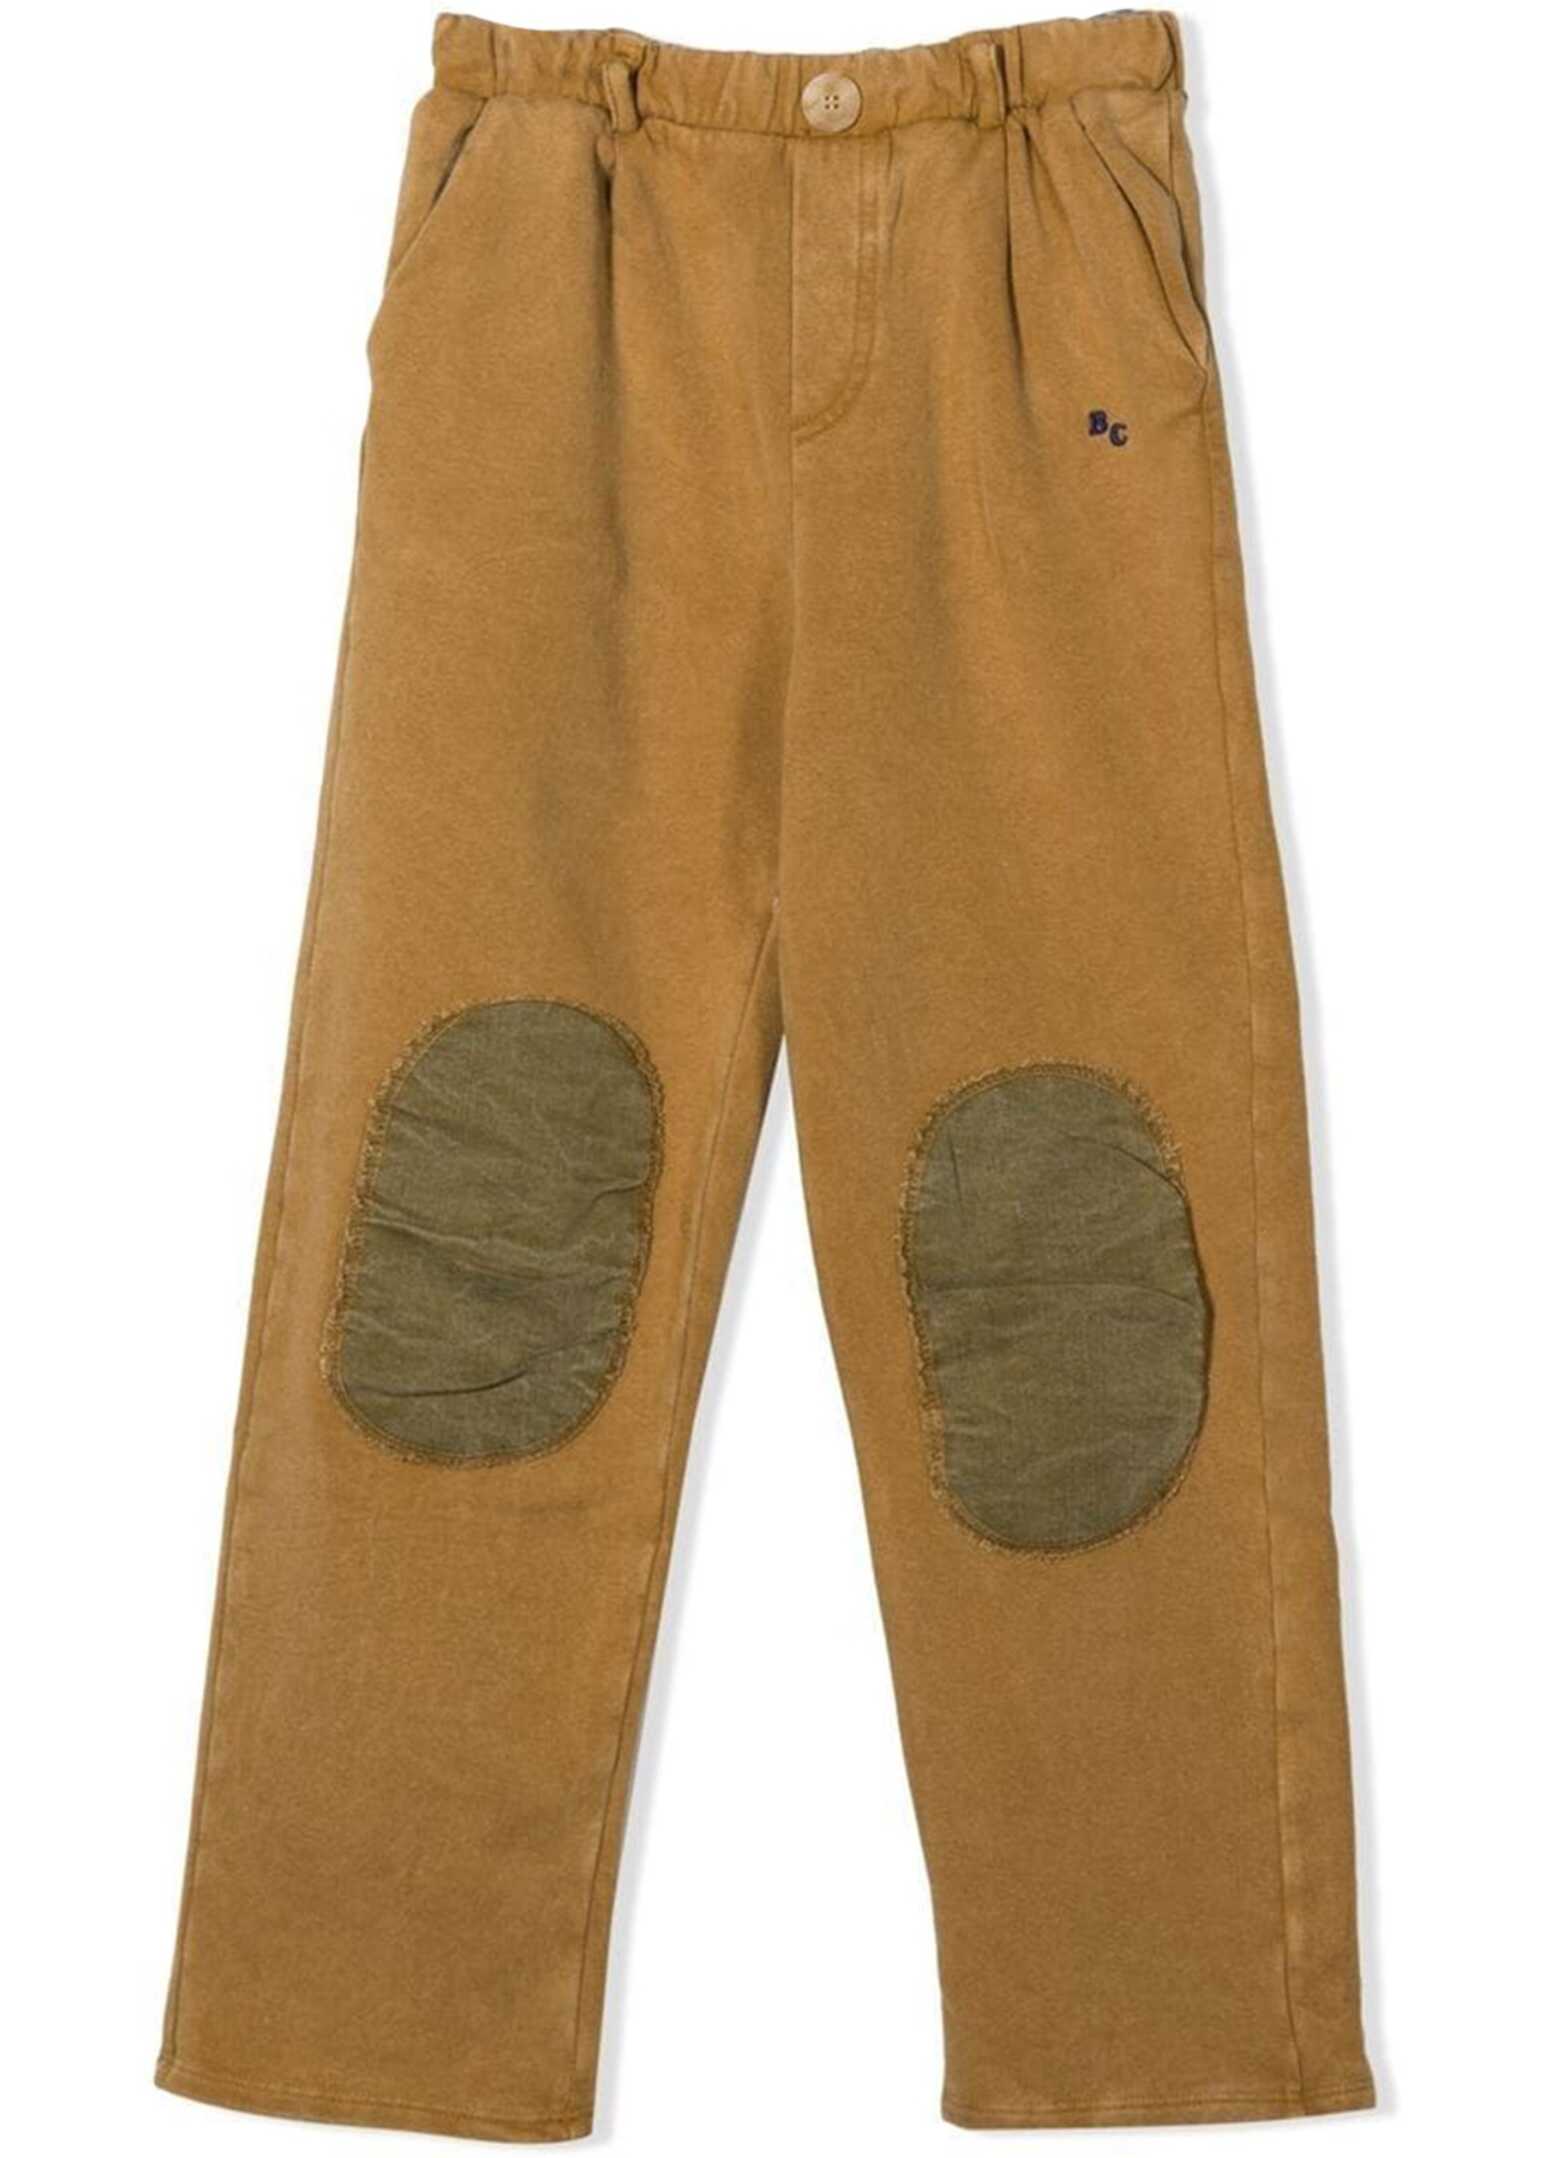 Bobo Choses Knee Patches Jogging Pants YELLOW